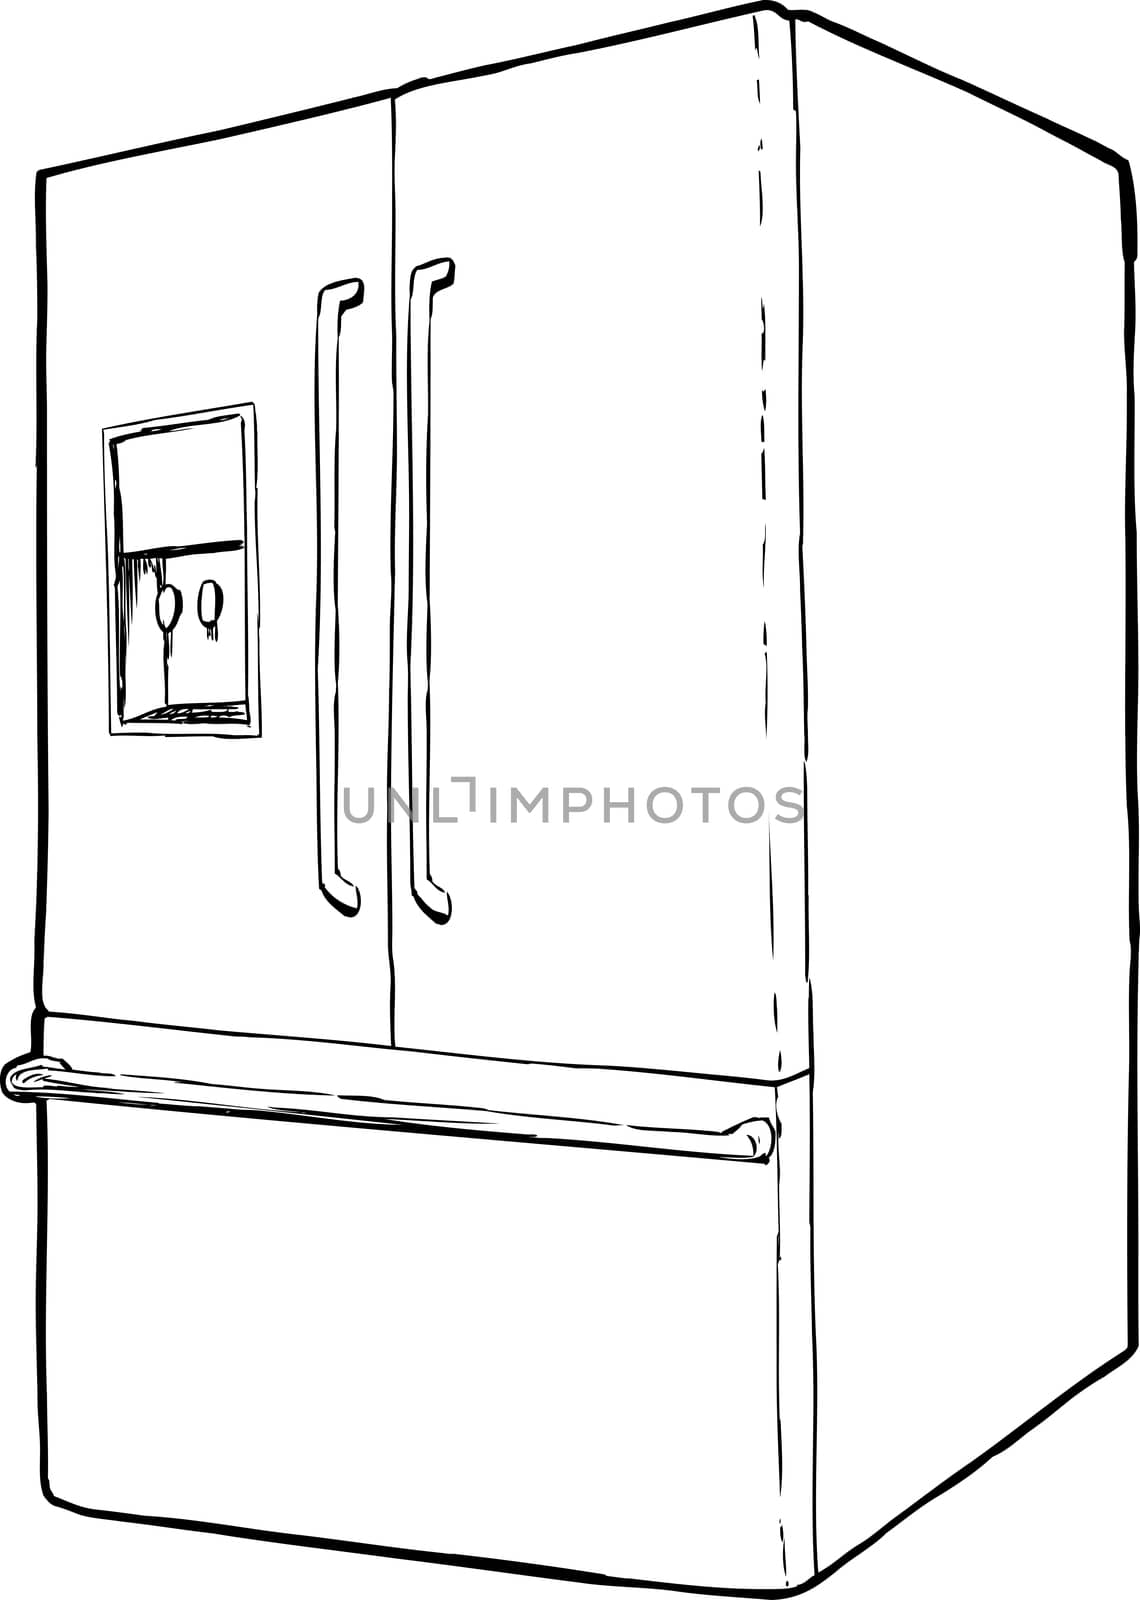 Refrigerator with Water Dispenser by TheBlackRhino